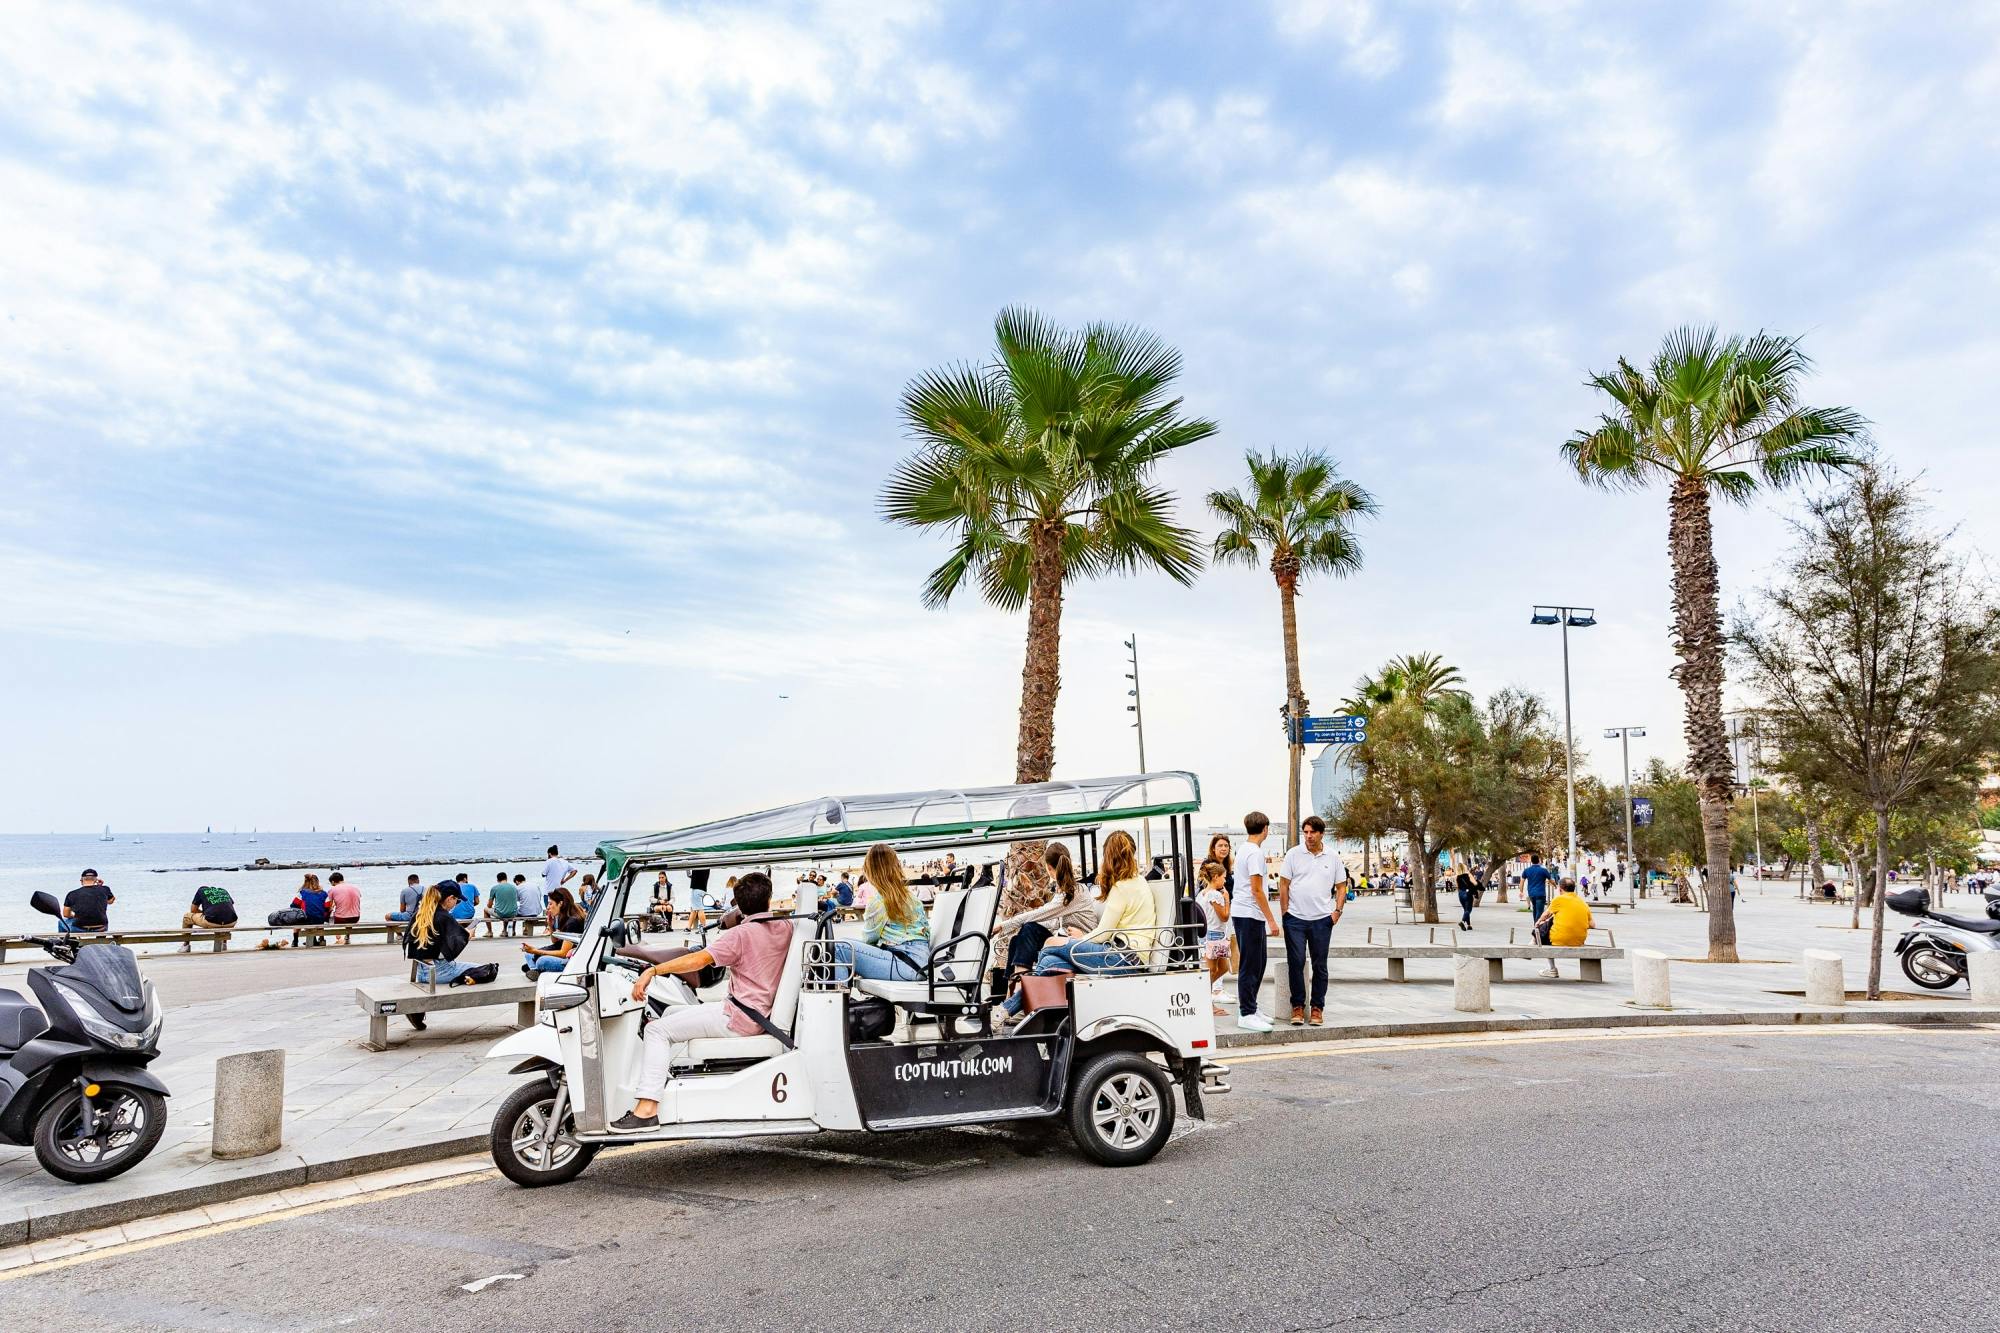 4-hour expert plus tour of Barcelona in a private electric tuk-tuk